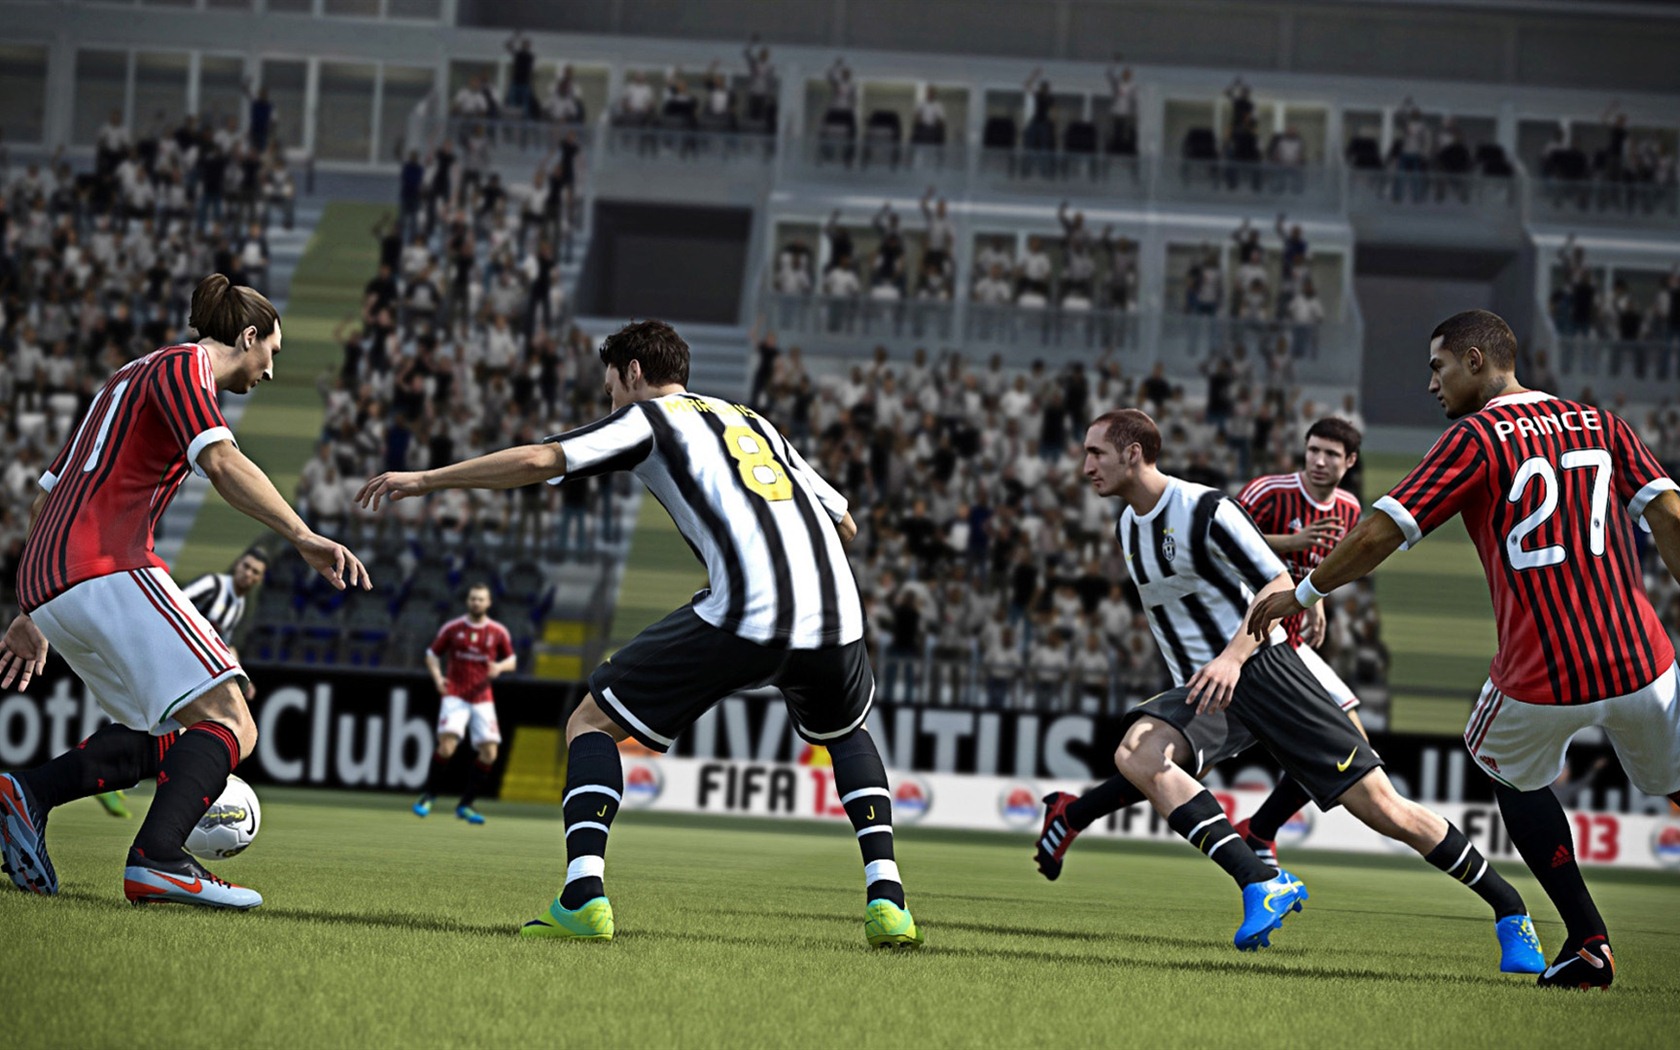 FIFA 13 game HD wallpapers #19 - 1680x1050